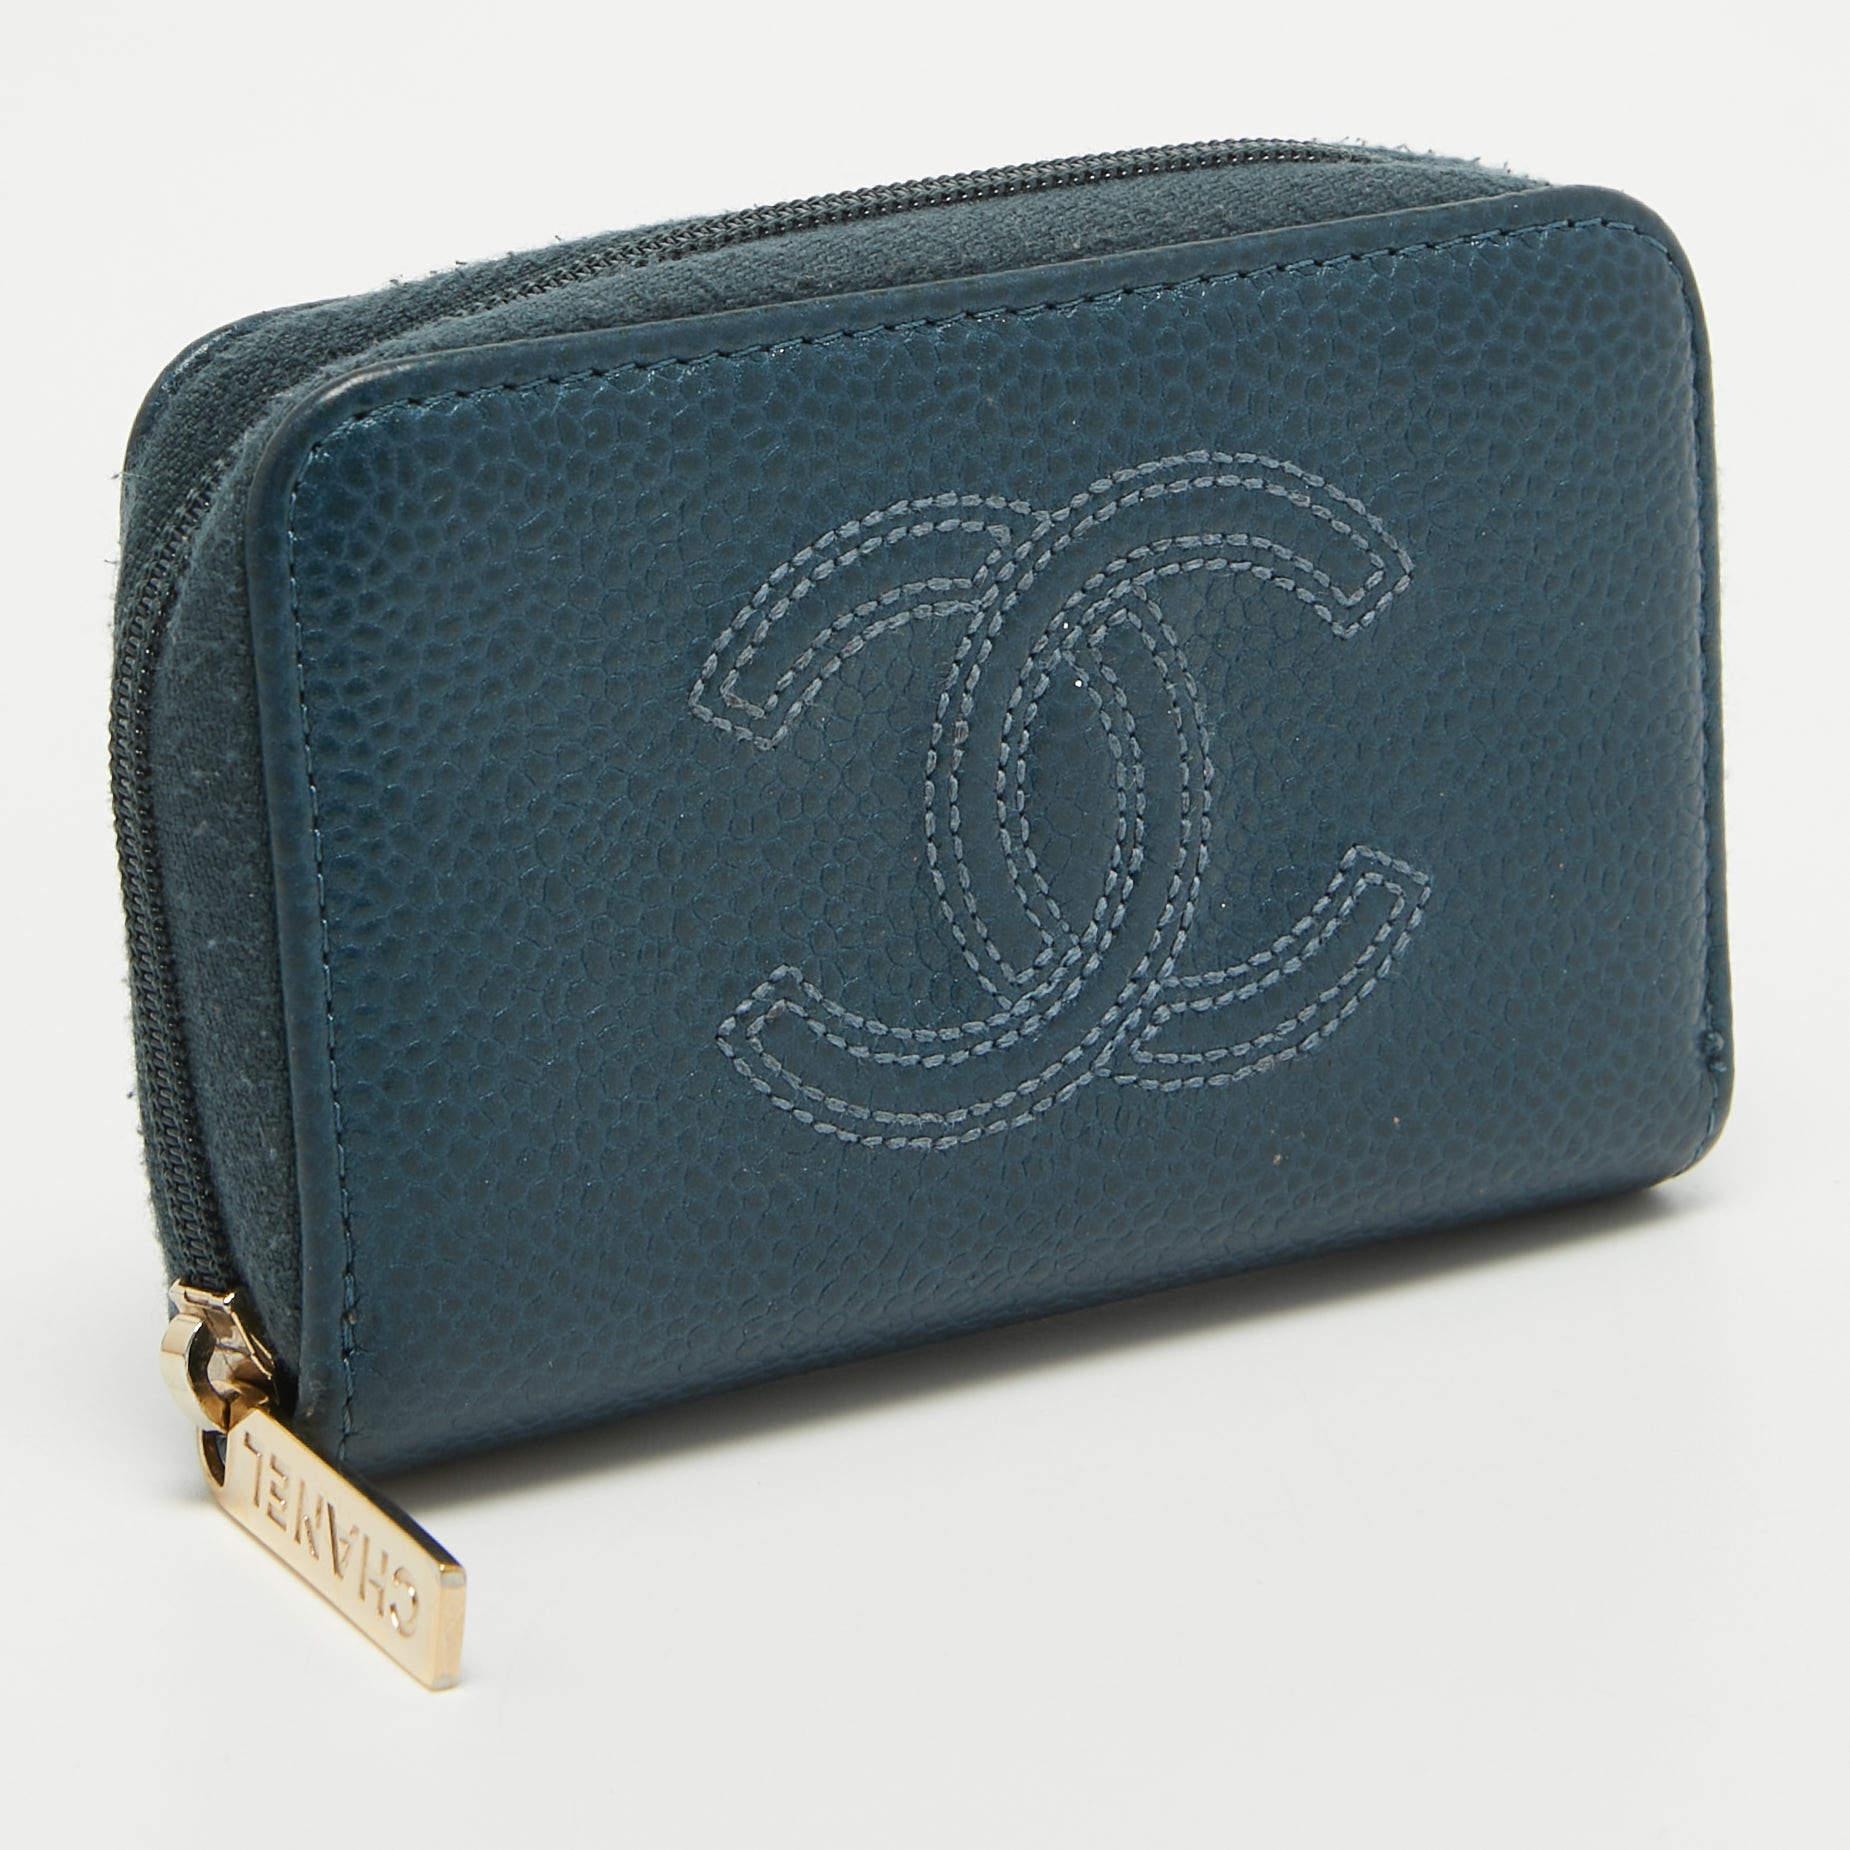 Crafted using Caviar leather, this Chanel coin purse will help carry your coins and other little essentials with ease. It comes in a lovely dark blue hue and is lined with fabric.

Includes
Original Dustbag, Authenticity Card